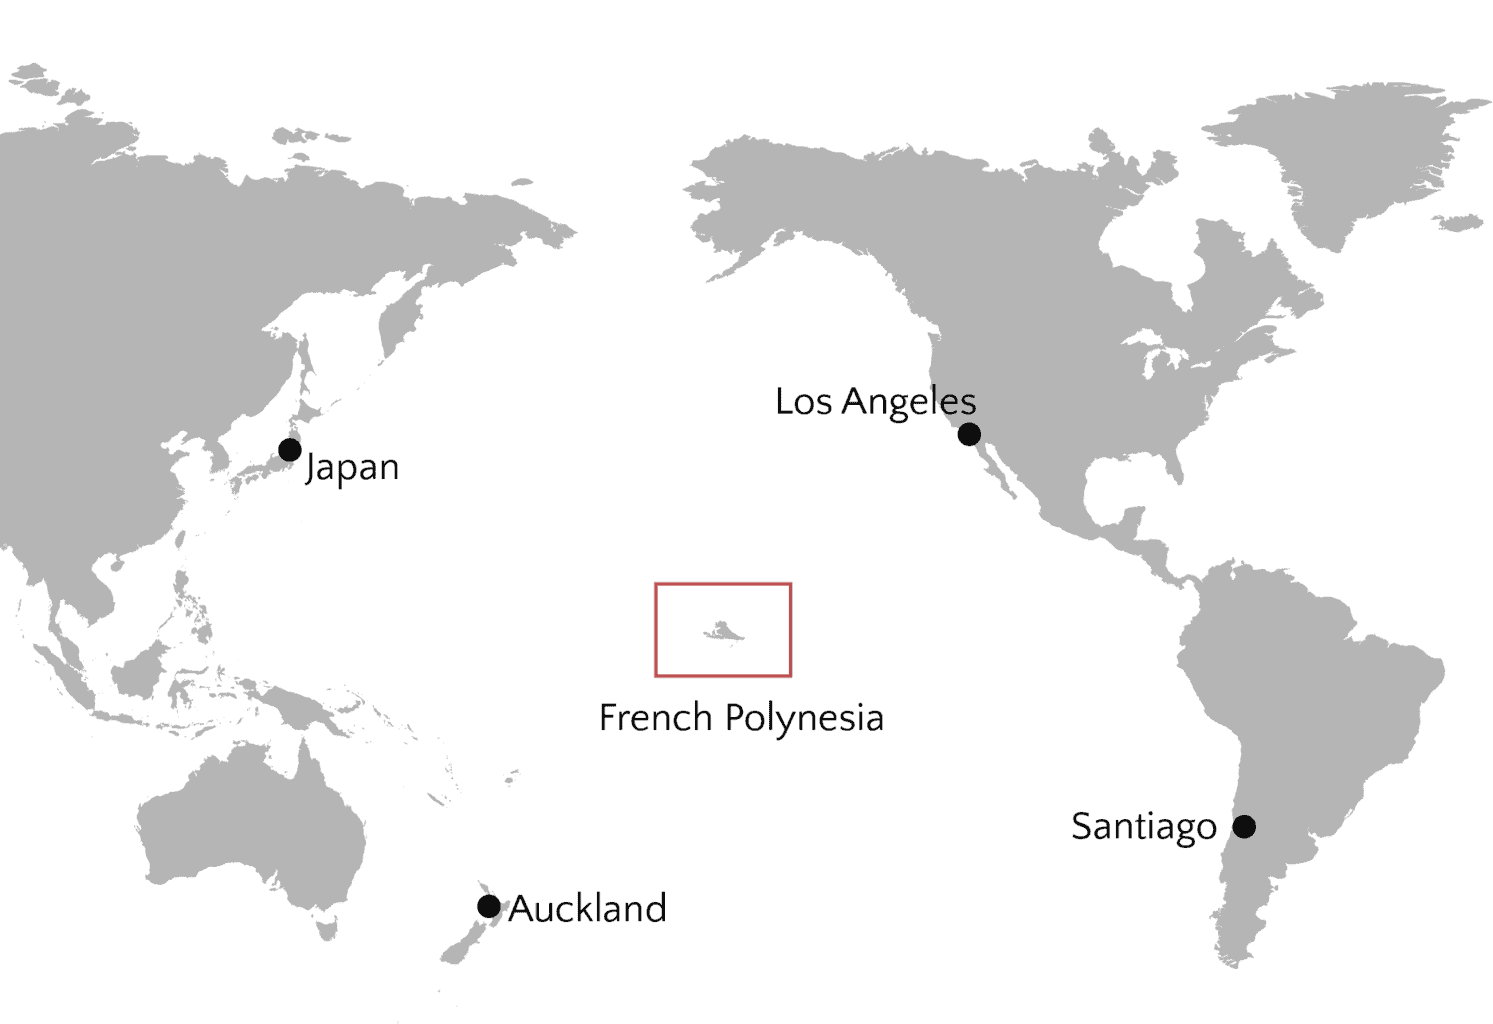 Which city is part of French Polynesia?